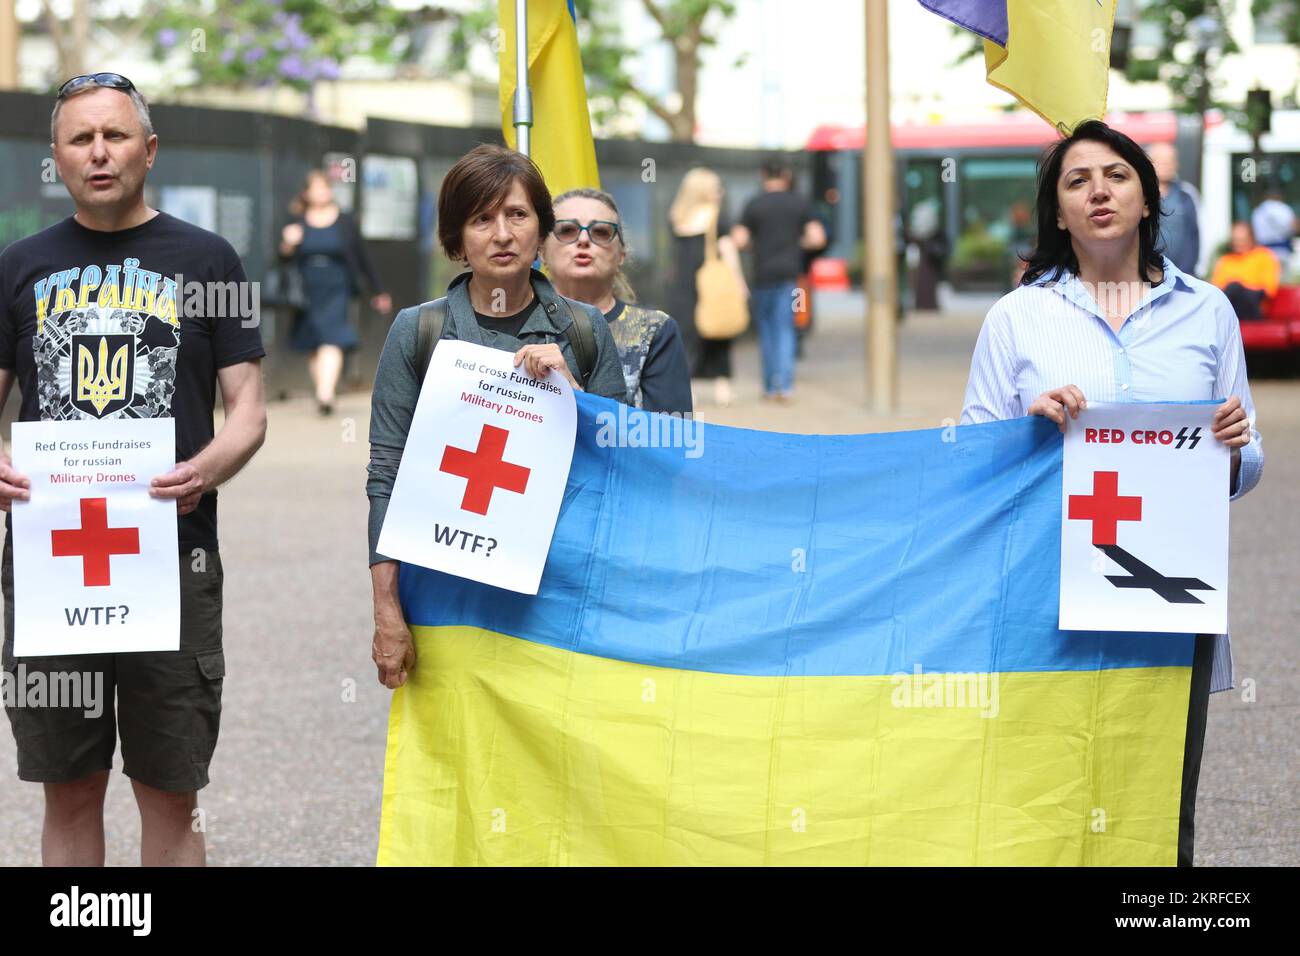 Sydney, Australia. 29th November 2022. A protest was held outside the Red Cross office at 464 Kent Street as they accuse the Russian Red Cross stealing property of the Ukrainian Red Cross in Crimea under the quiet approval from other offices and from the ICRC as well as fundraising for the Russian army and other efforts that could help Russia in the war against Ukraine. Credit: Richard Milnes/Alamy Live News Stock Photo